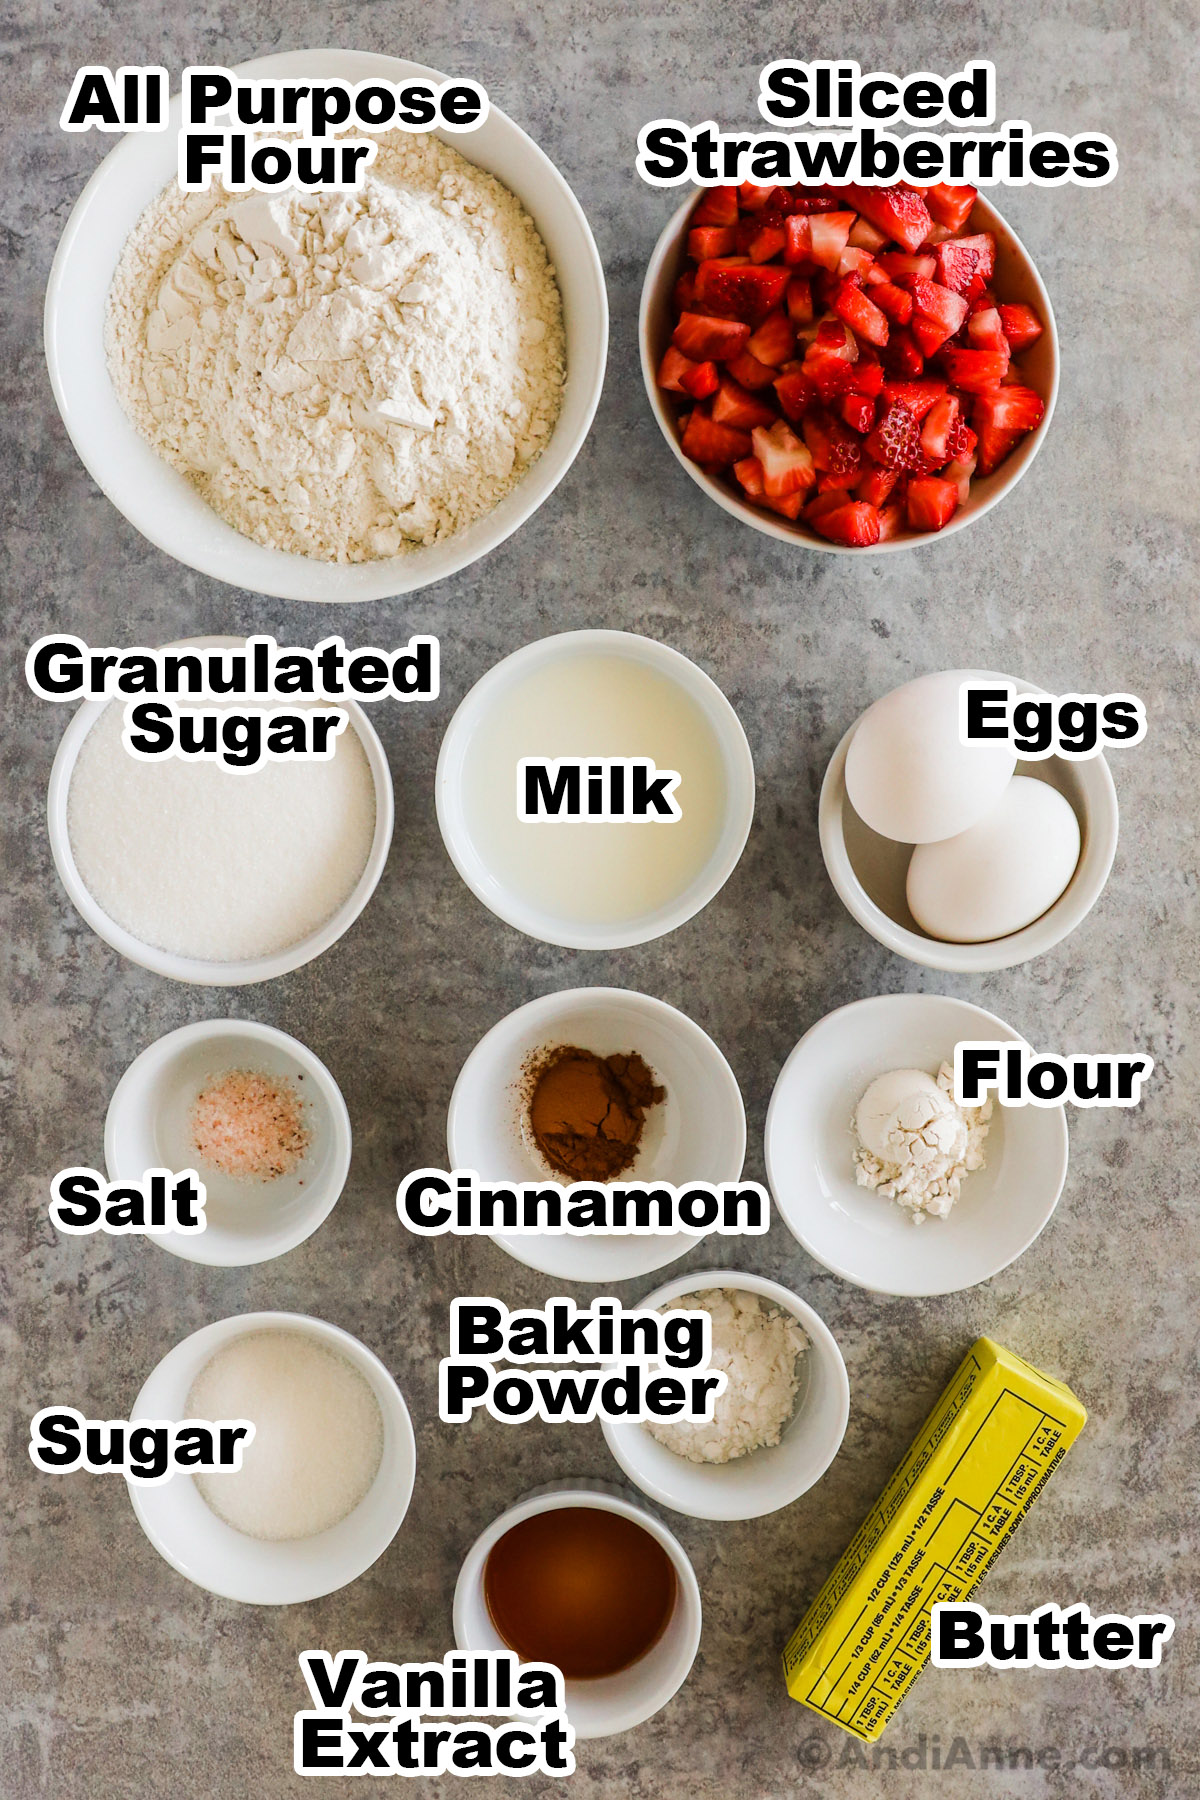 Recipe ingredients on the counter including a bowl of flour, sliced strawberries, sugar, milk, eggs, cinnamon, flour, sugar, baking powder, vanilla and butter.